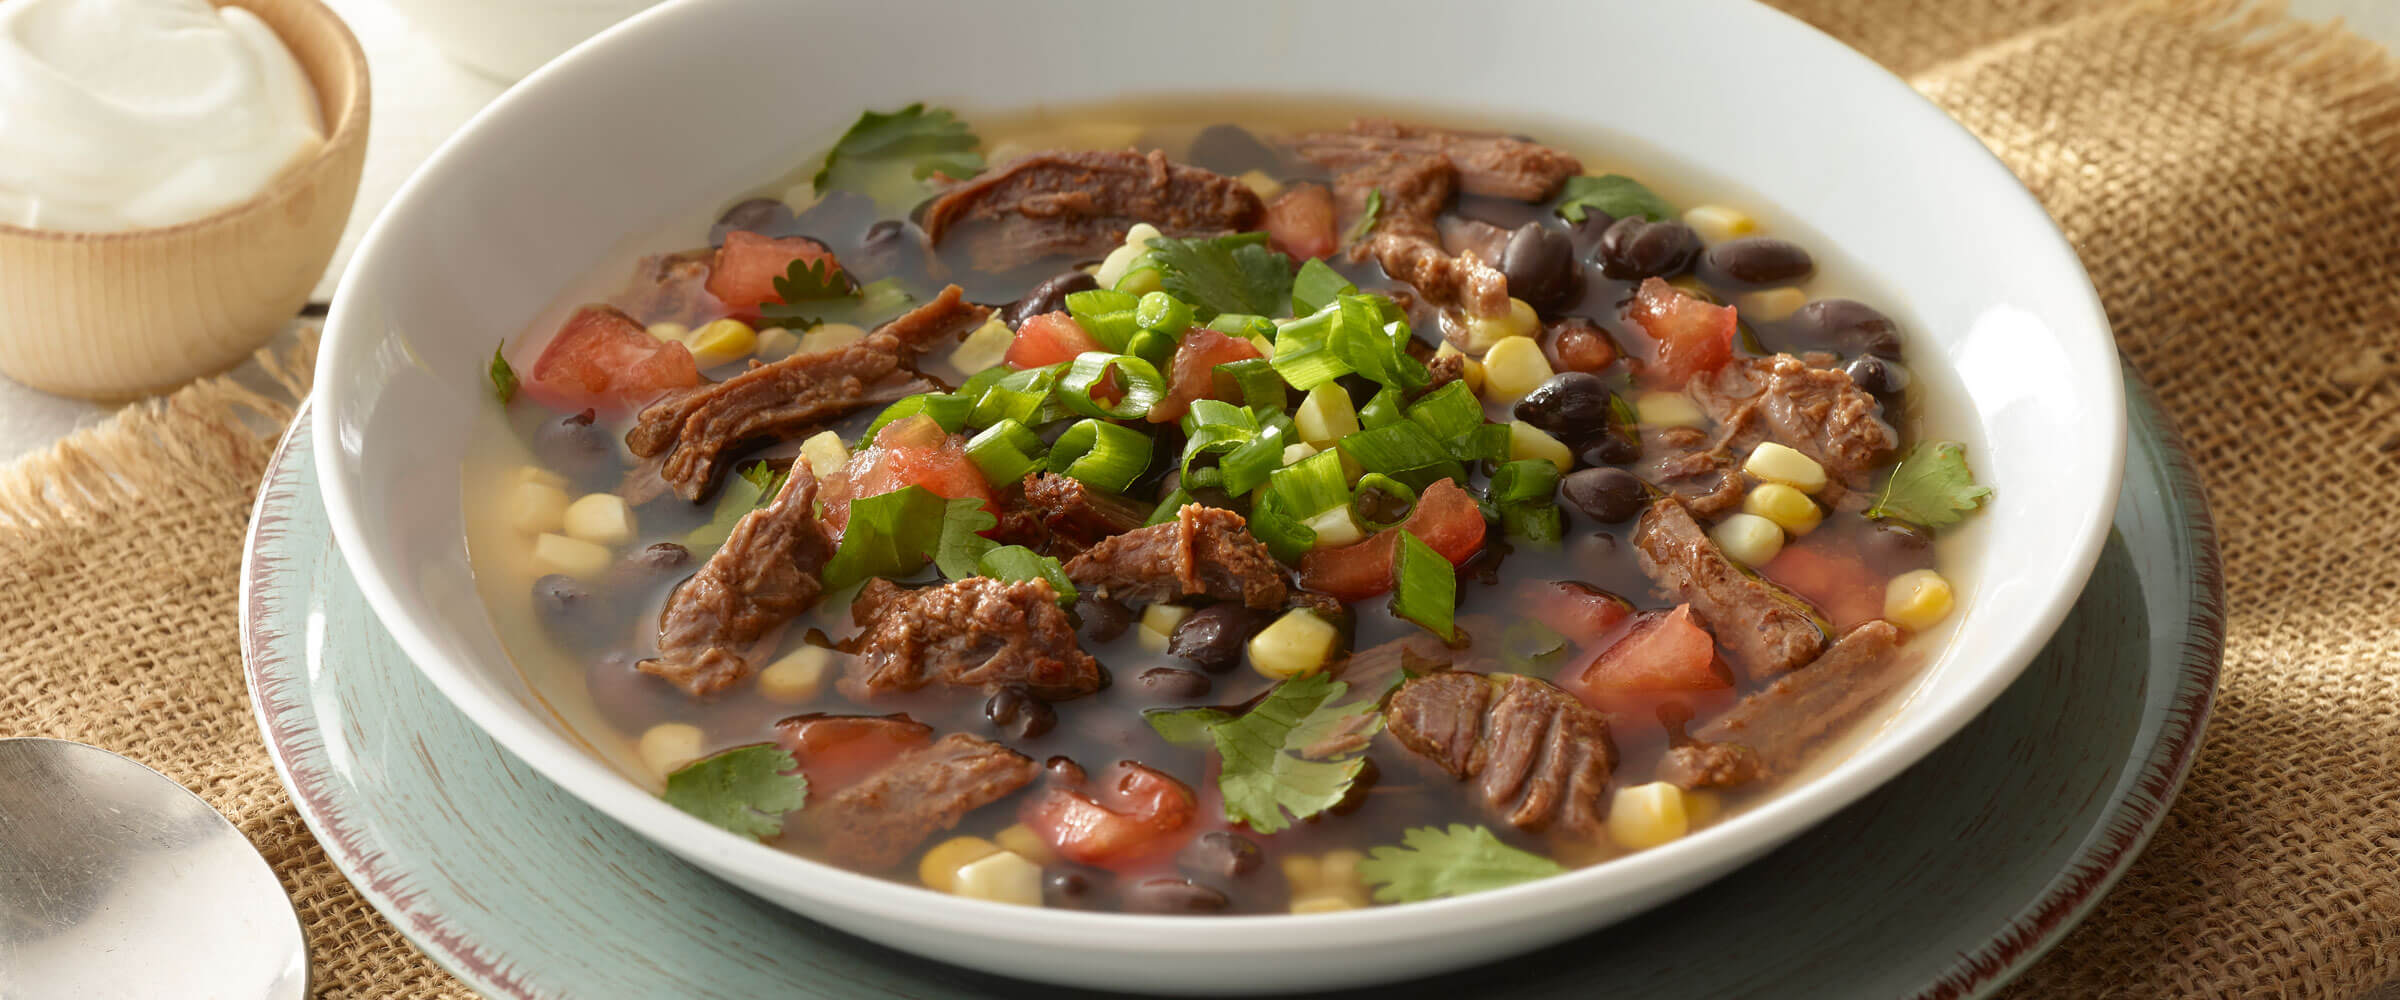 Hearty Beef & Black Bean soup topped with green onions in a white bowl